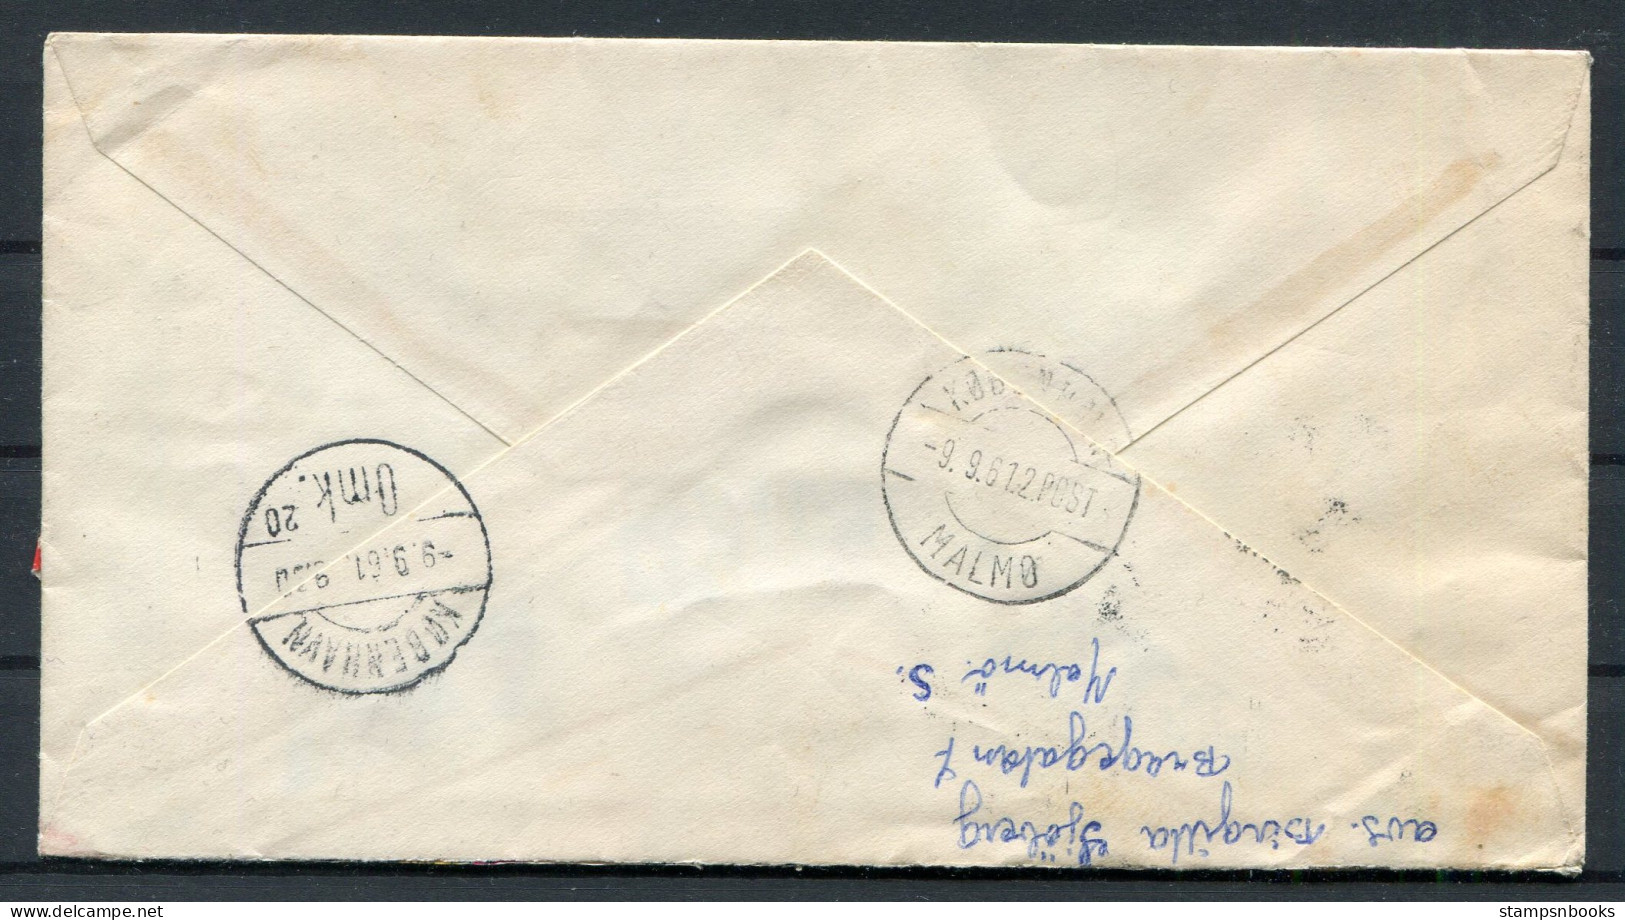 1961 Sweden Malmo Express Cover - Copenhagen  - Covers & Documents